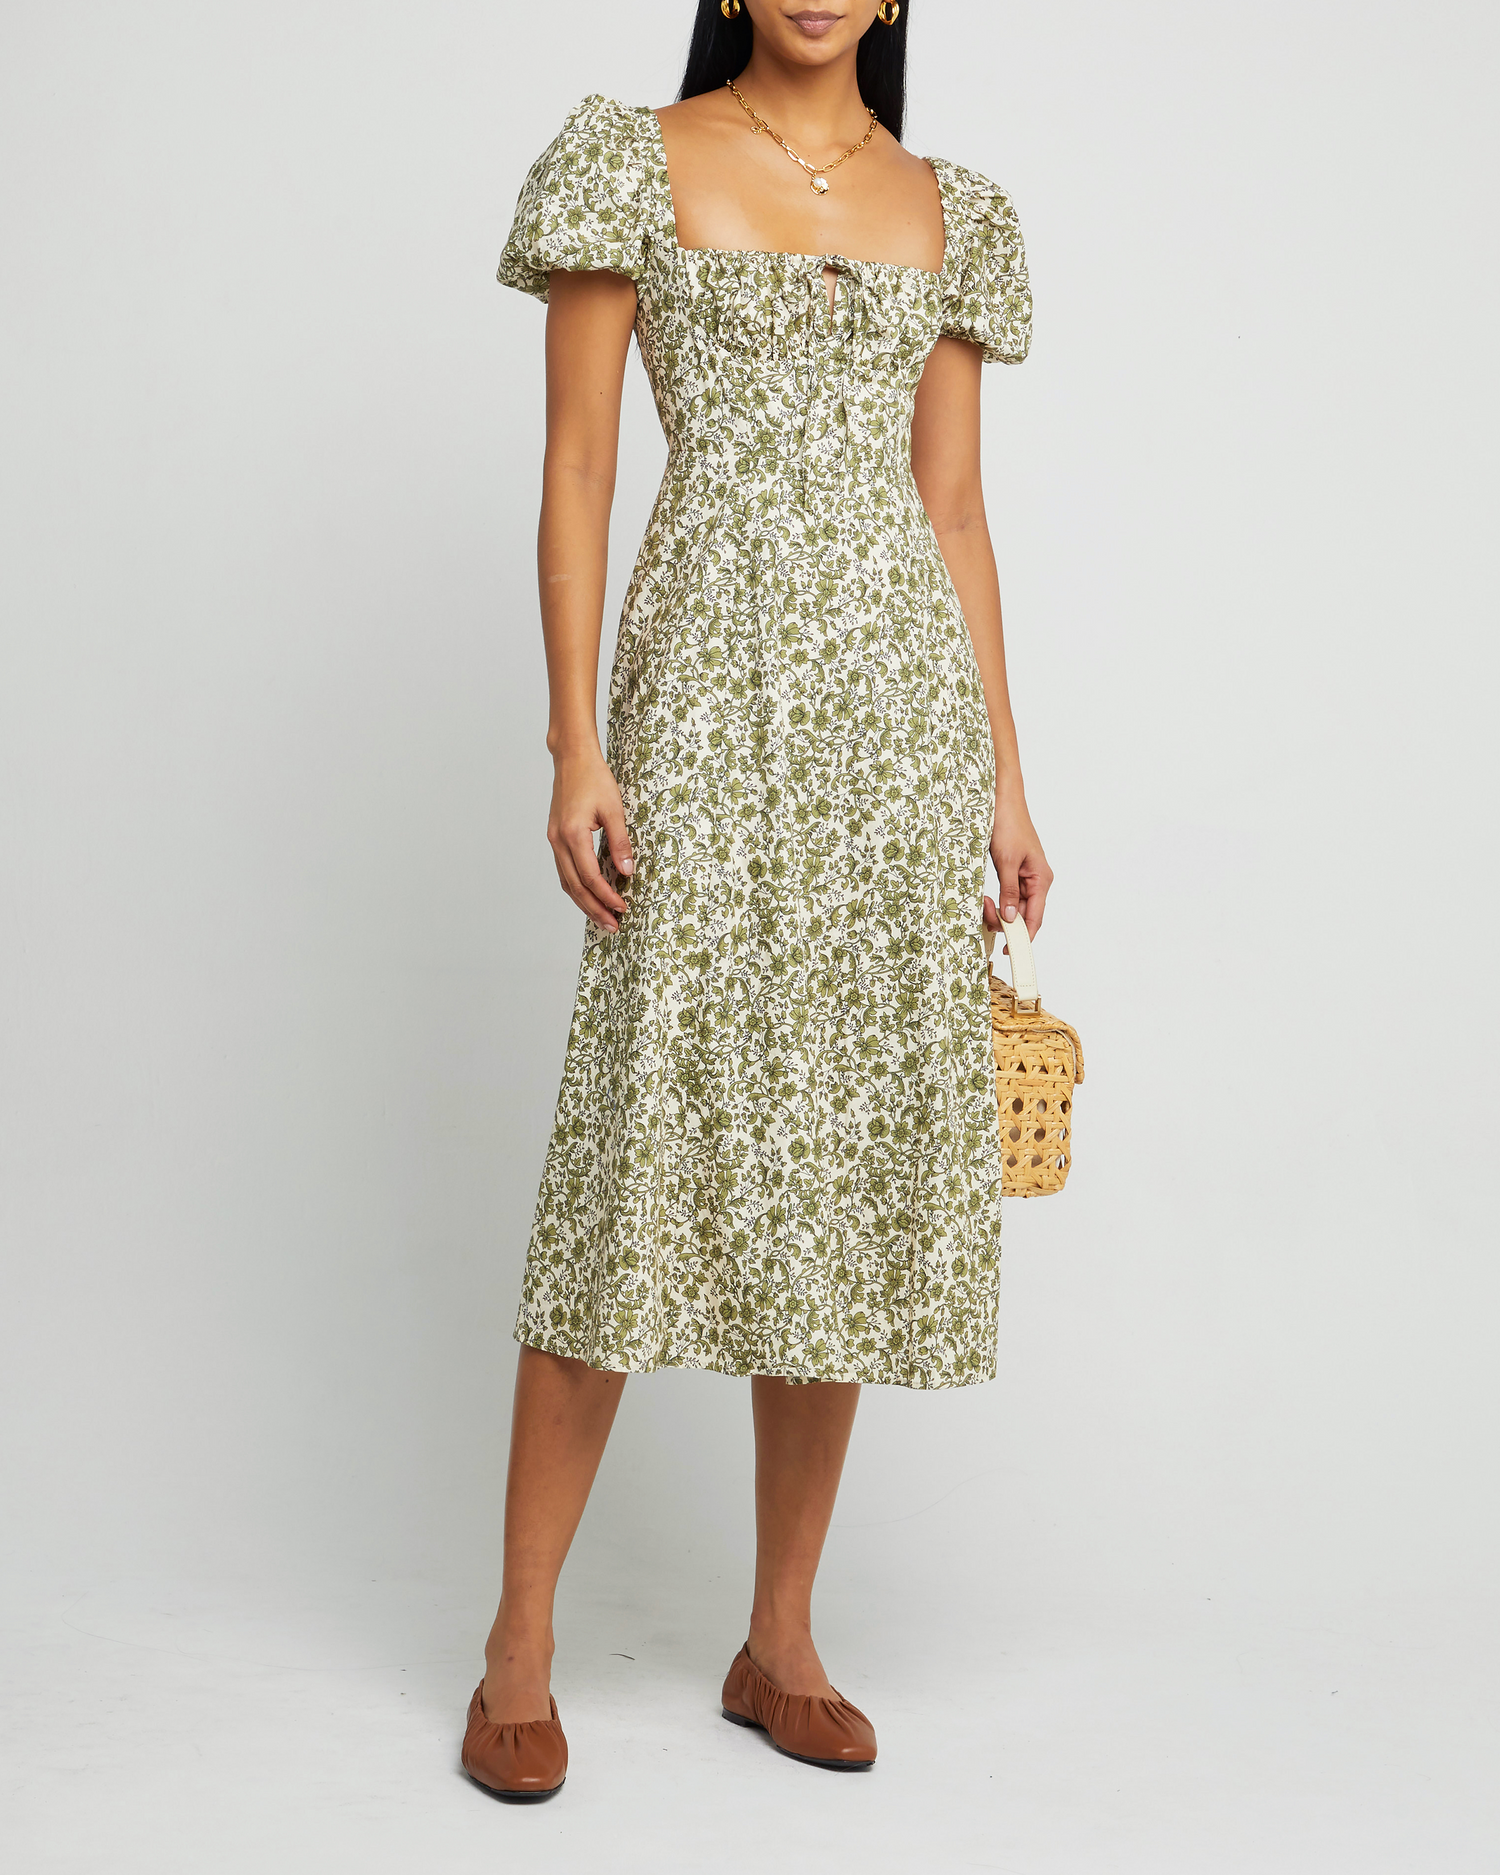 Fourth image of Cotton Peasant Dress, a green maxi dress, tie detail, puff sleeves, short sleeves, side slit